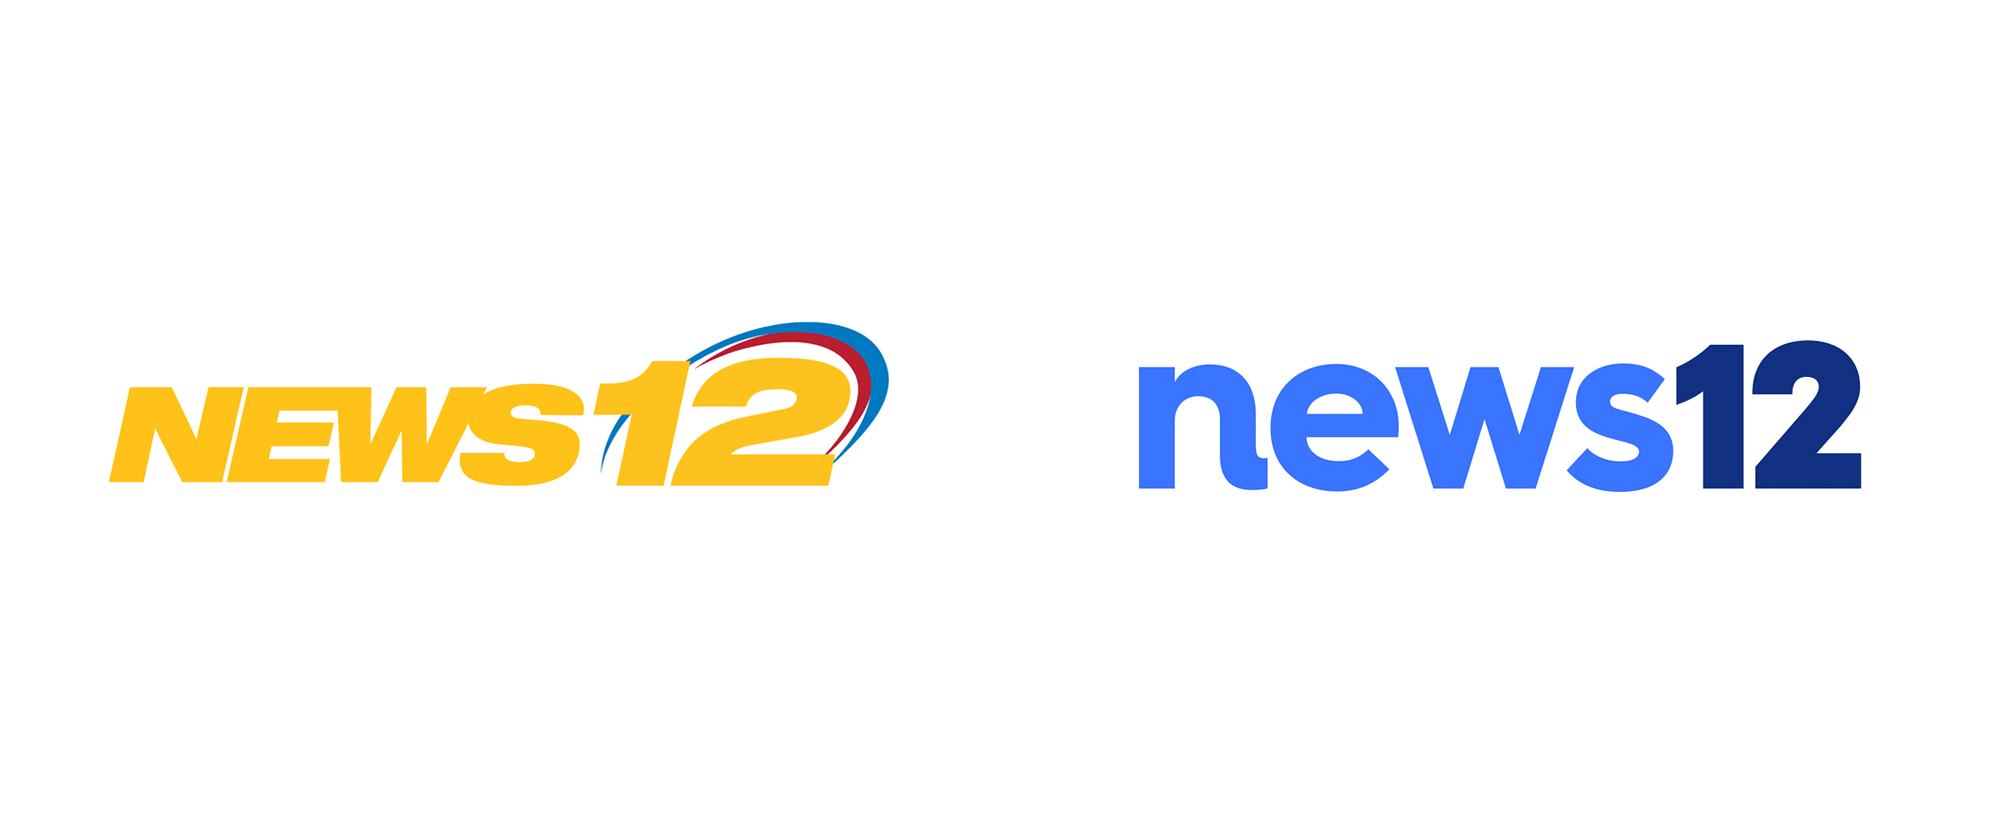 brand-new-new-logo-for-news-12-networks-by-thornberg-and-forester